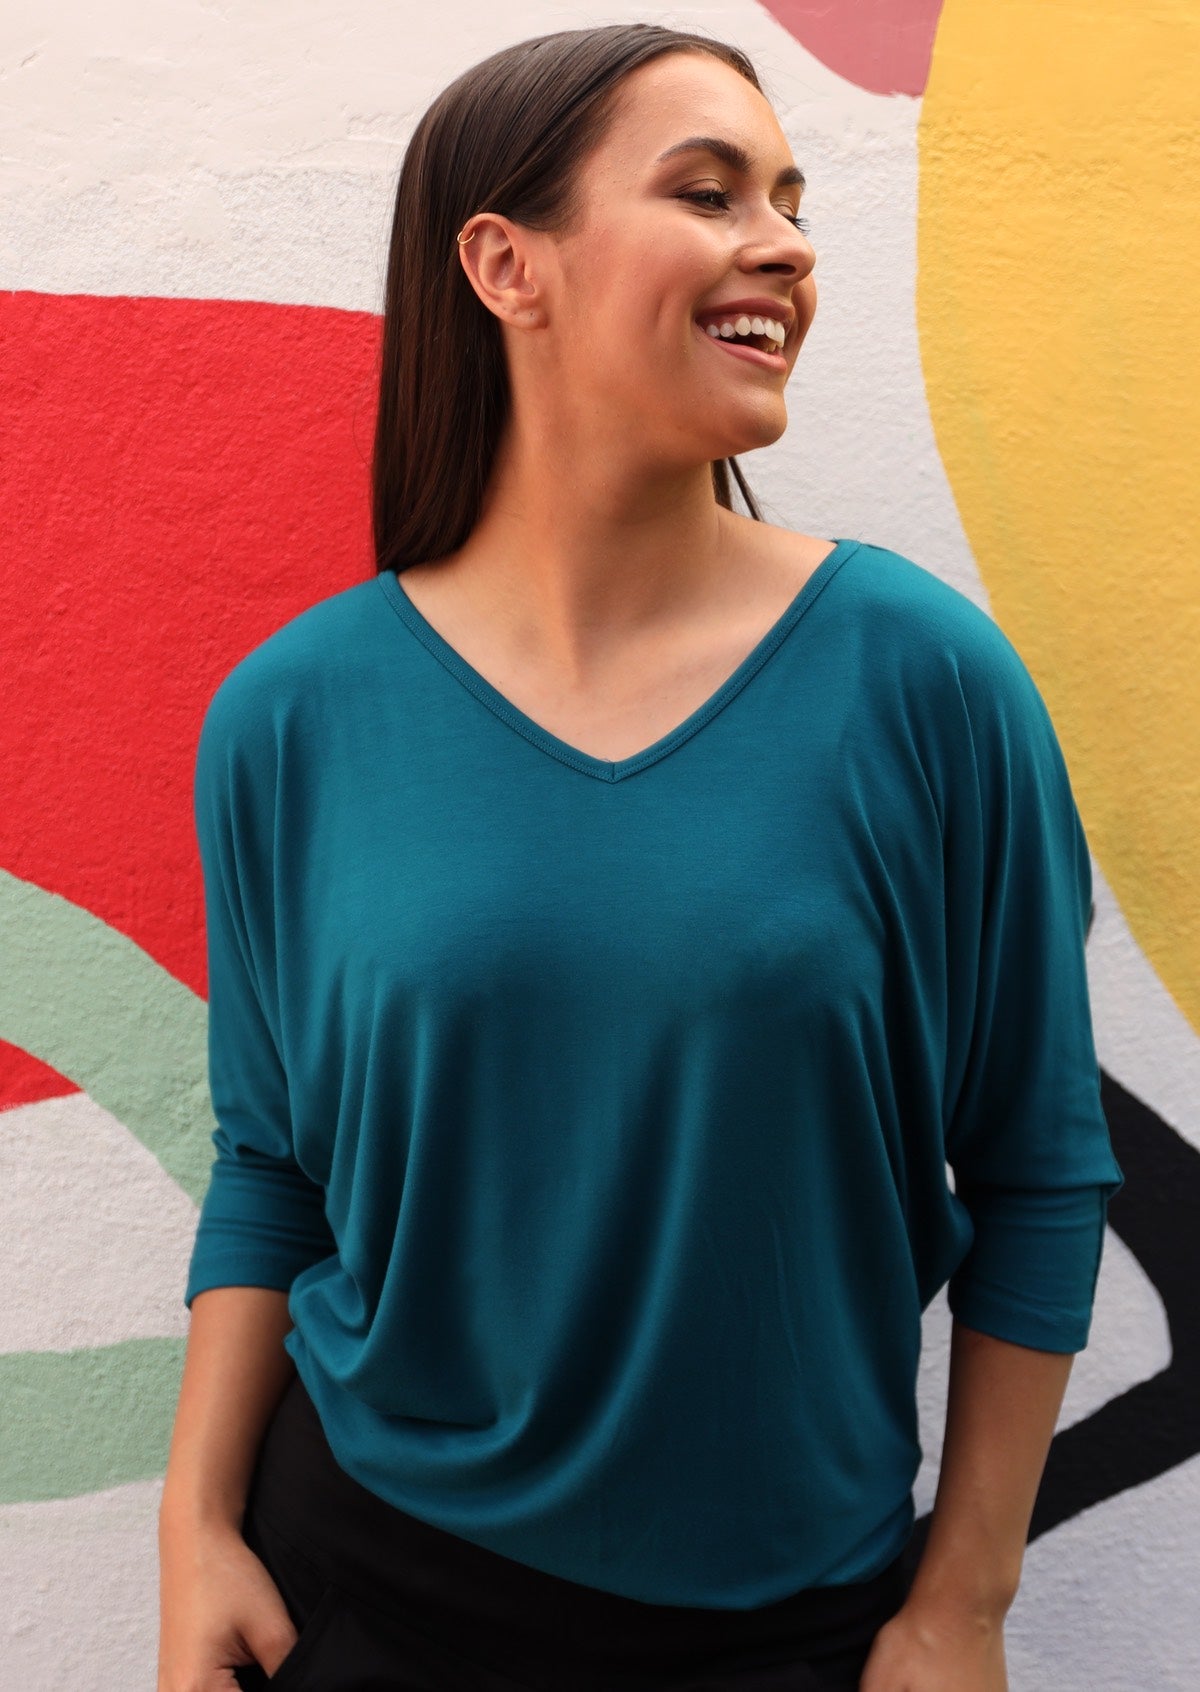 Woman wearing a 3/4 sleeve rayon batwing v-neck teal top.